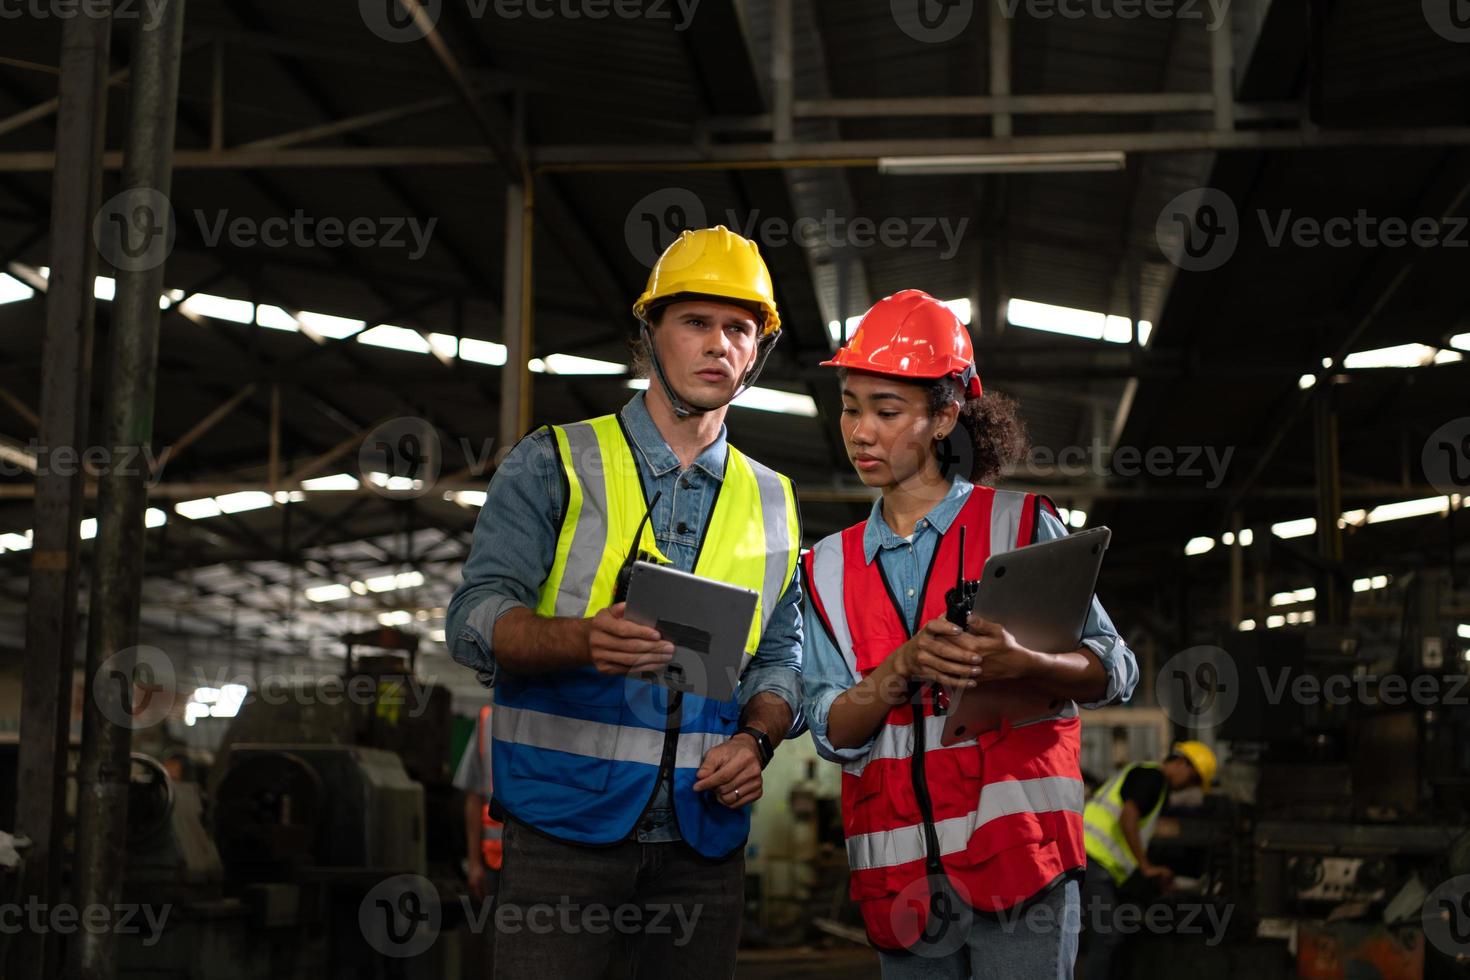 The foreign chief engineer came to inspect the old mechanical factory. There is an African female mechanic explaining details and progress reports photo